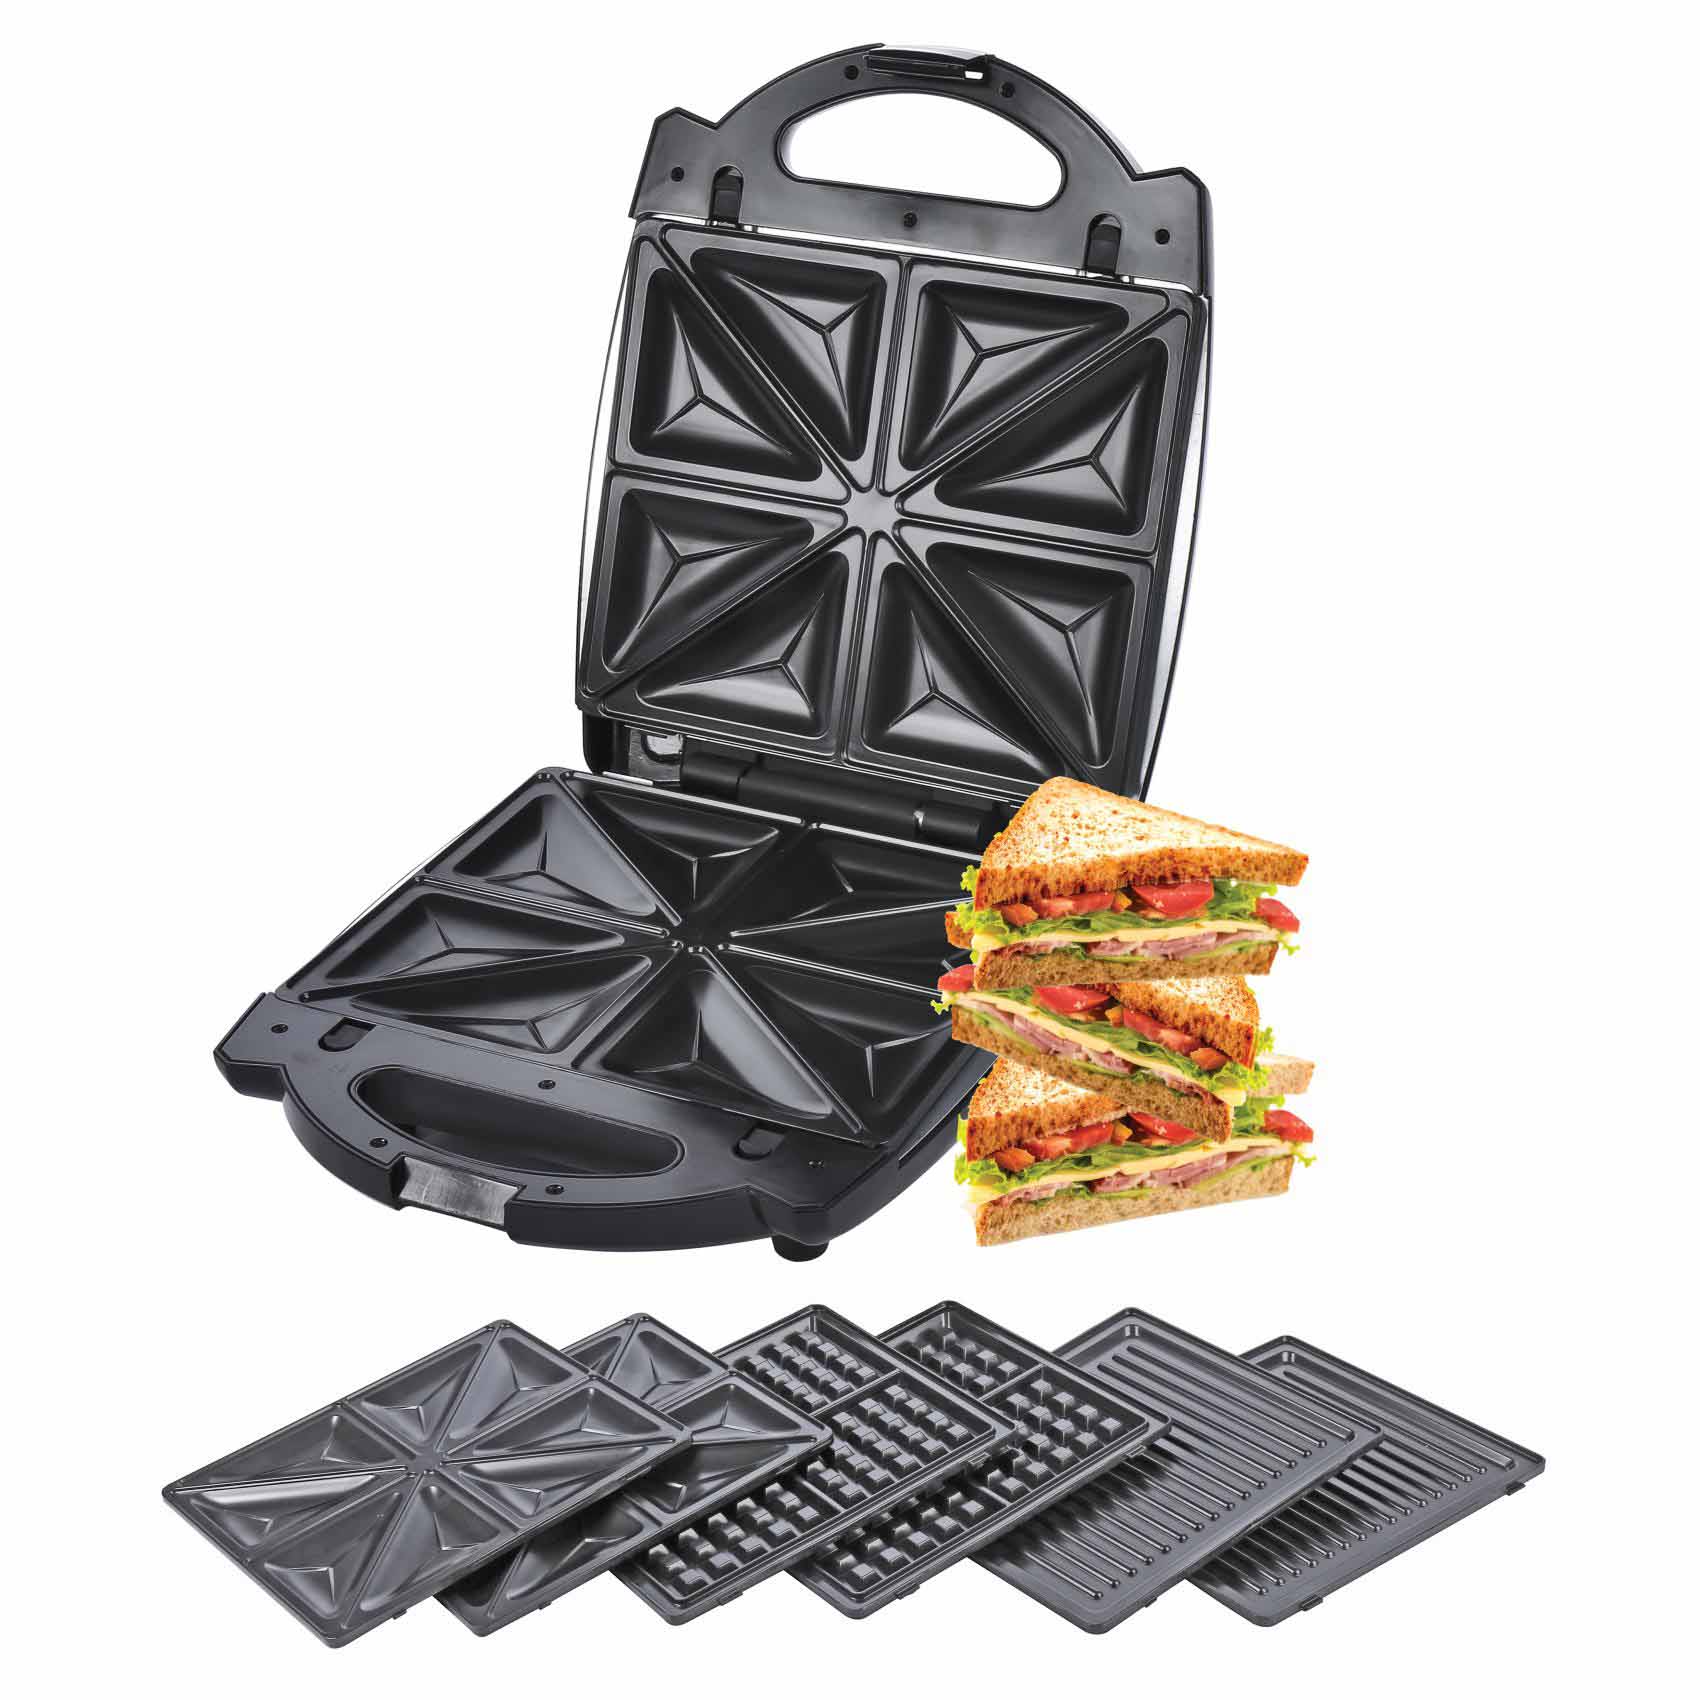 3 IN 1 SANDWICH MAKER 1400W | 3 EXTRA DETACHABLE PLATES | NON-STICK COATING | 4 SLICE | WAFFLE – TOASTIE – GRILL- PANINI | THERMO CONTROL | COOL-TOUCH HOUSING VE-162